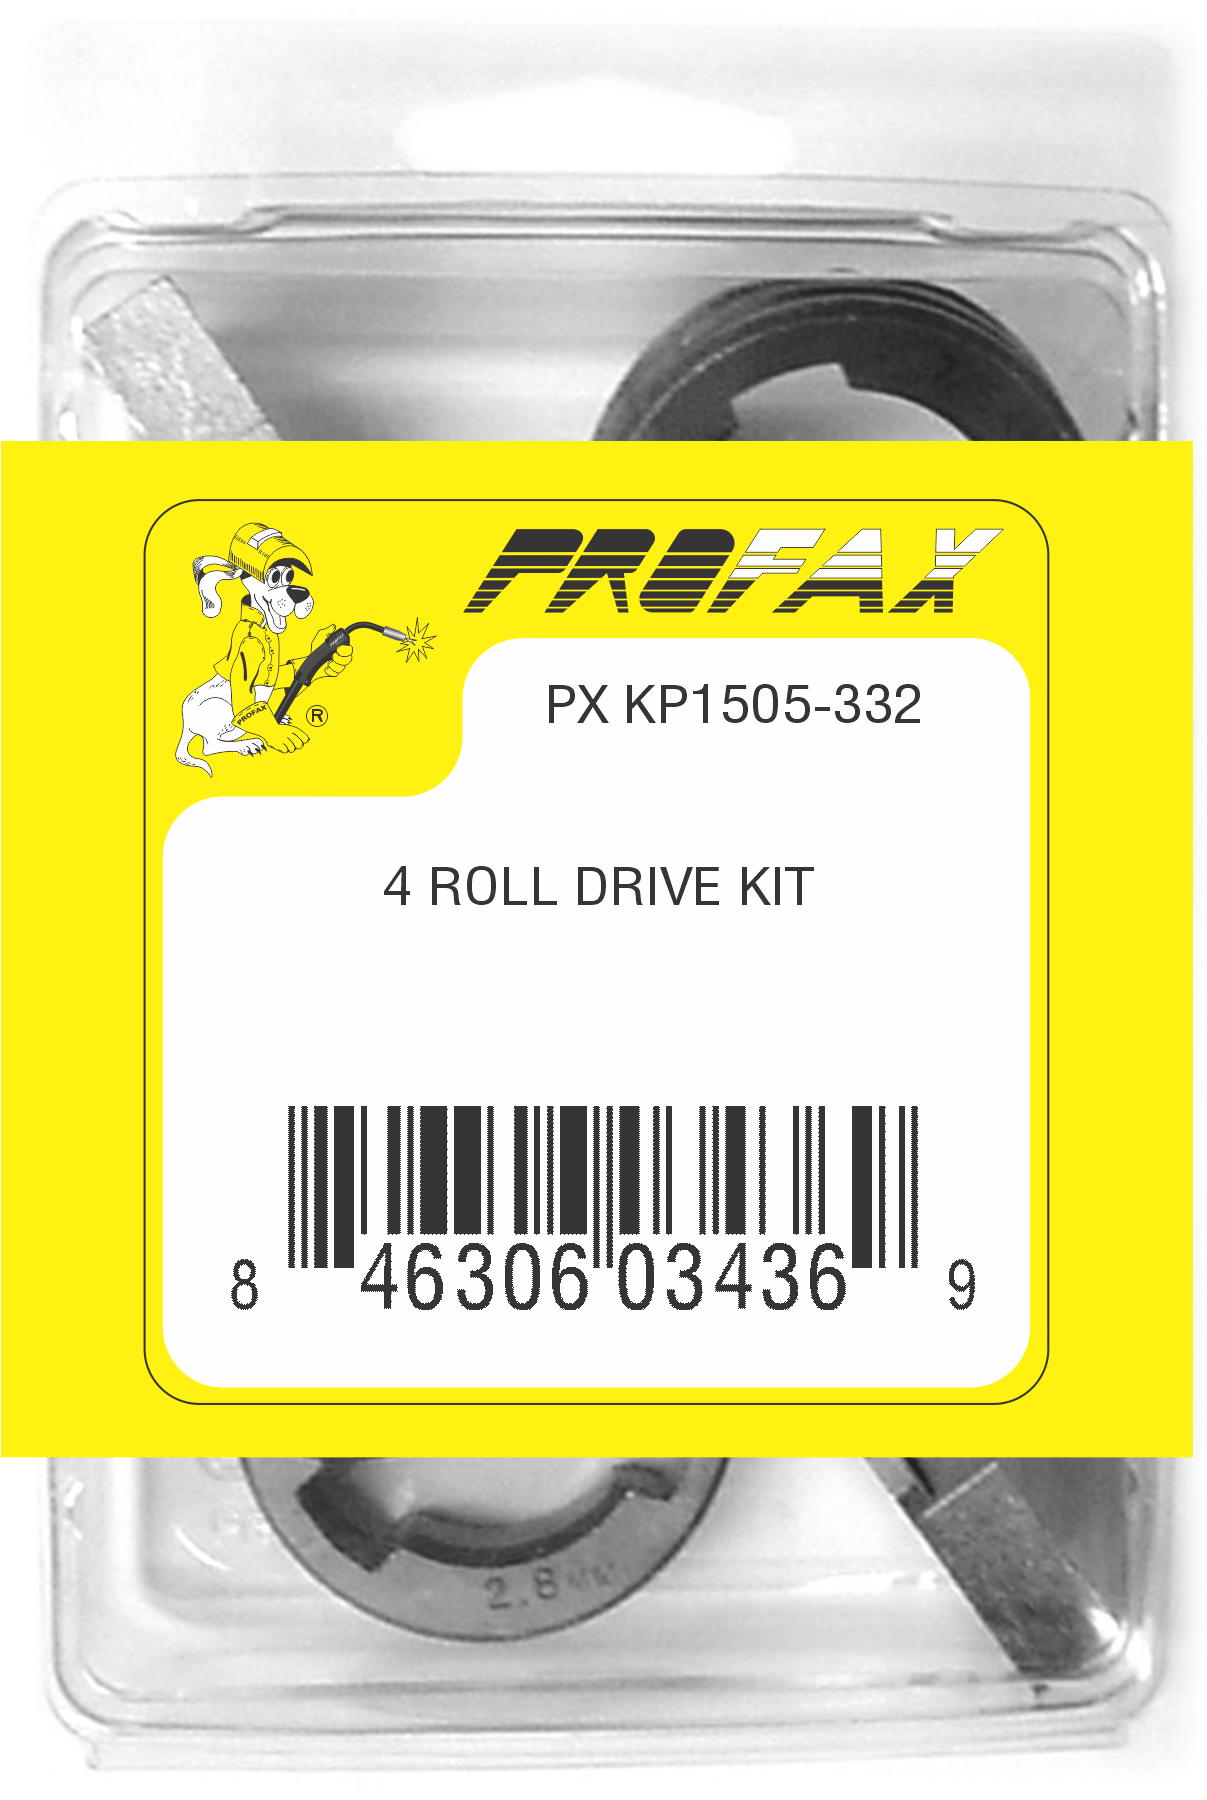 Profax Consumables Lincoln Drive Roll Kit 3/32" 4 Roll (KP1505-332)